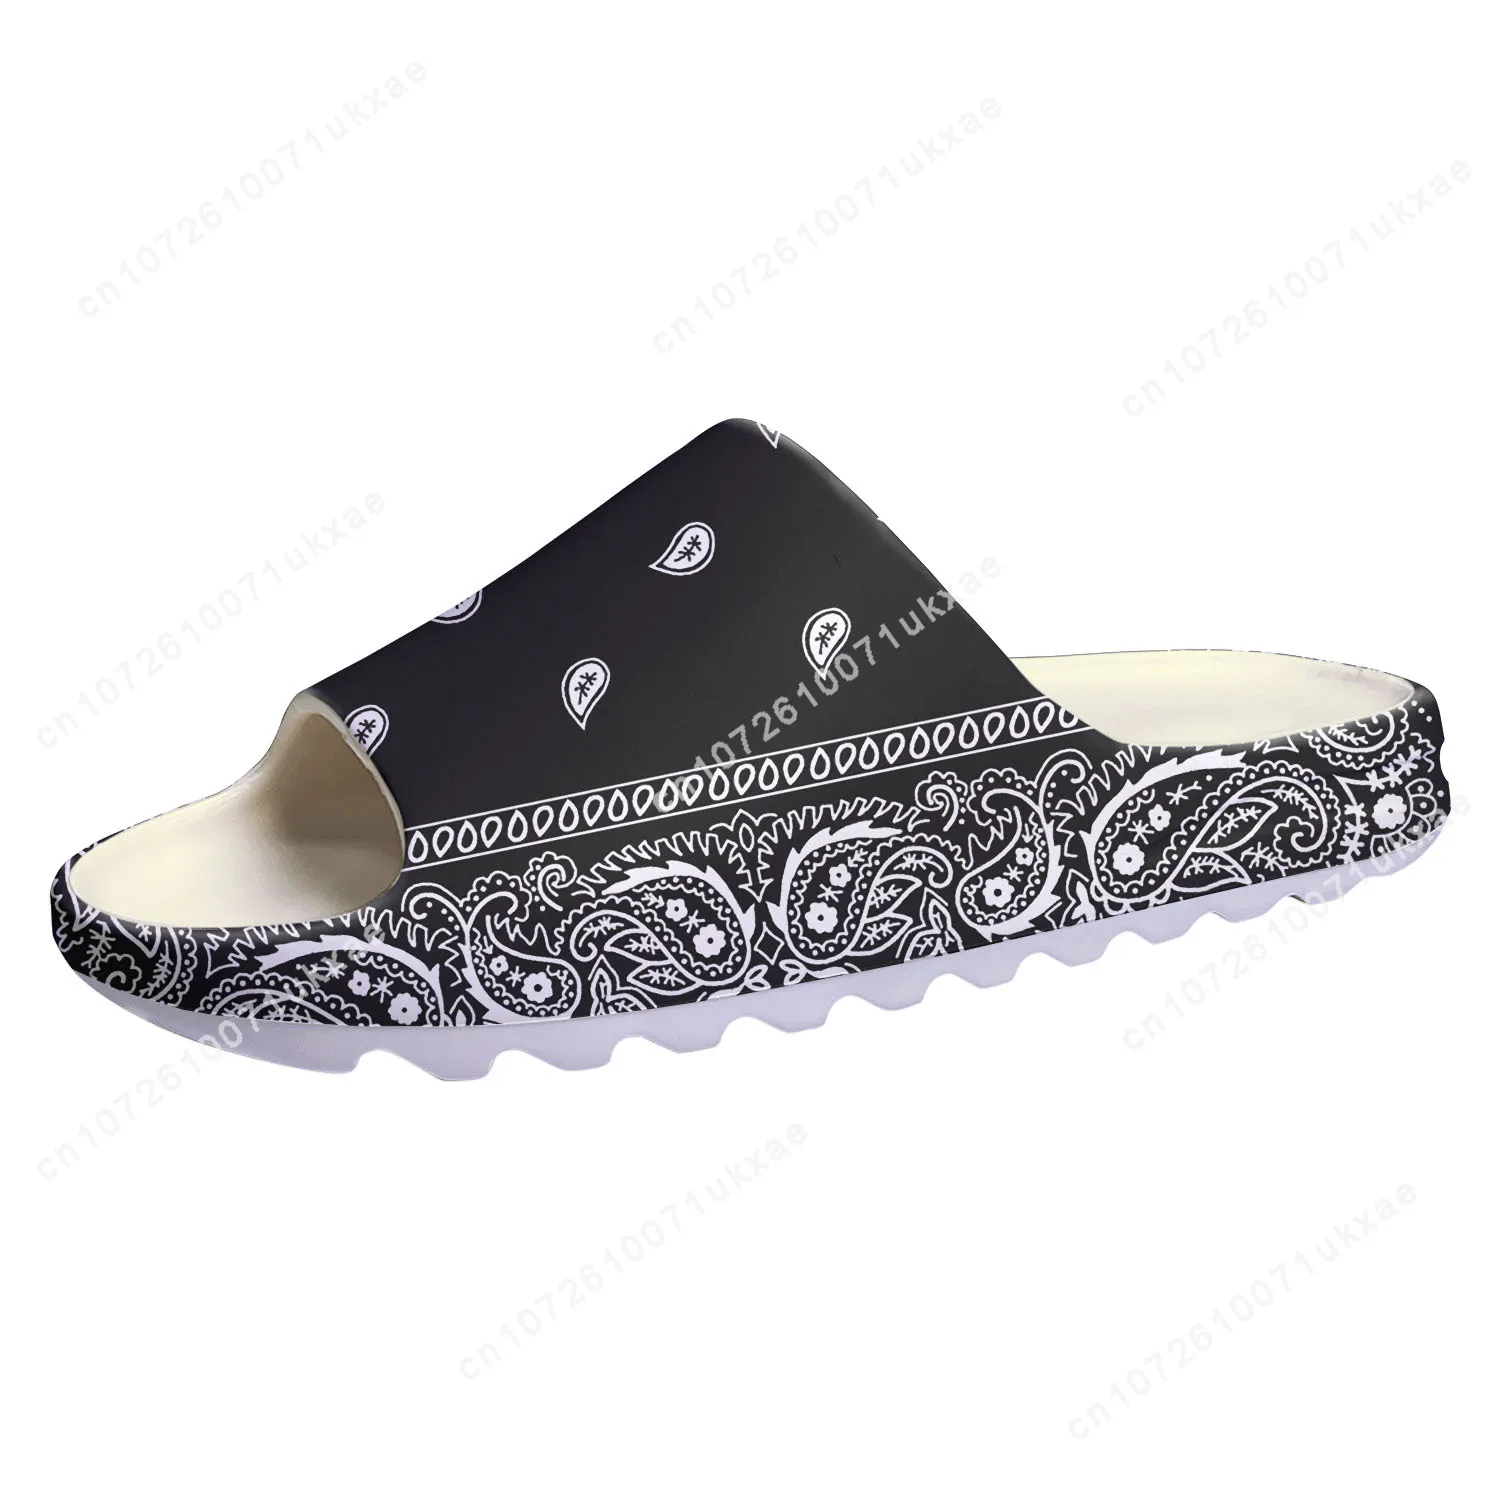 

Bandana Paisley Soft Sole Sllipers Home Clogs Black White Blue Step On Water Shoes Mens Womens Teenager Step in Custom Sandals